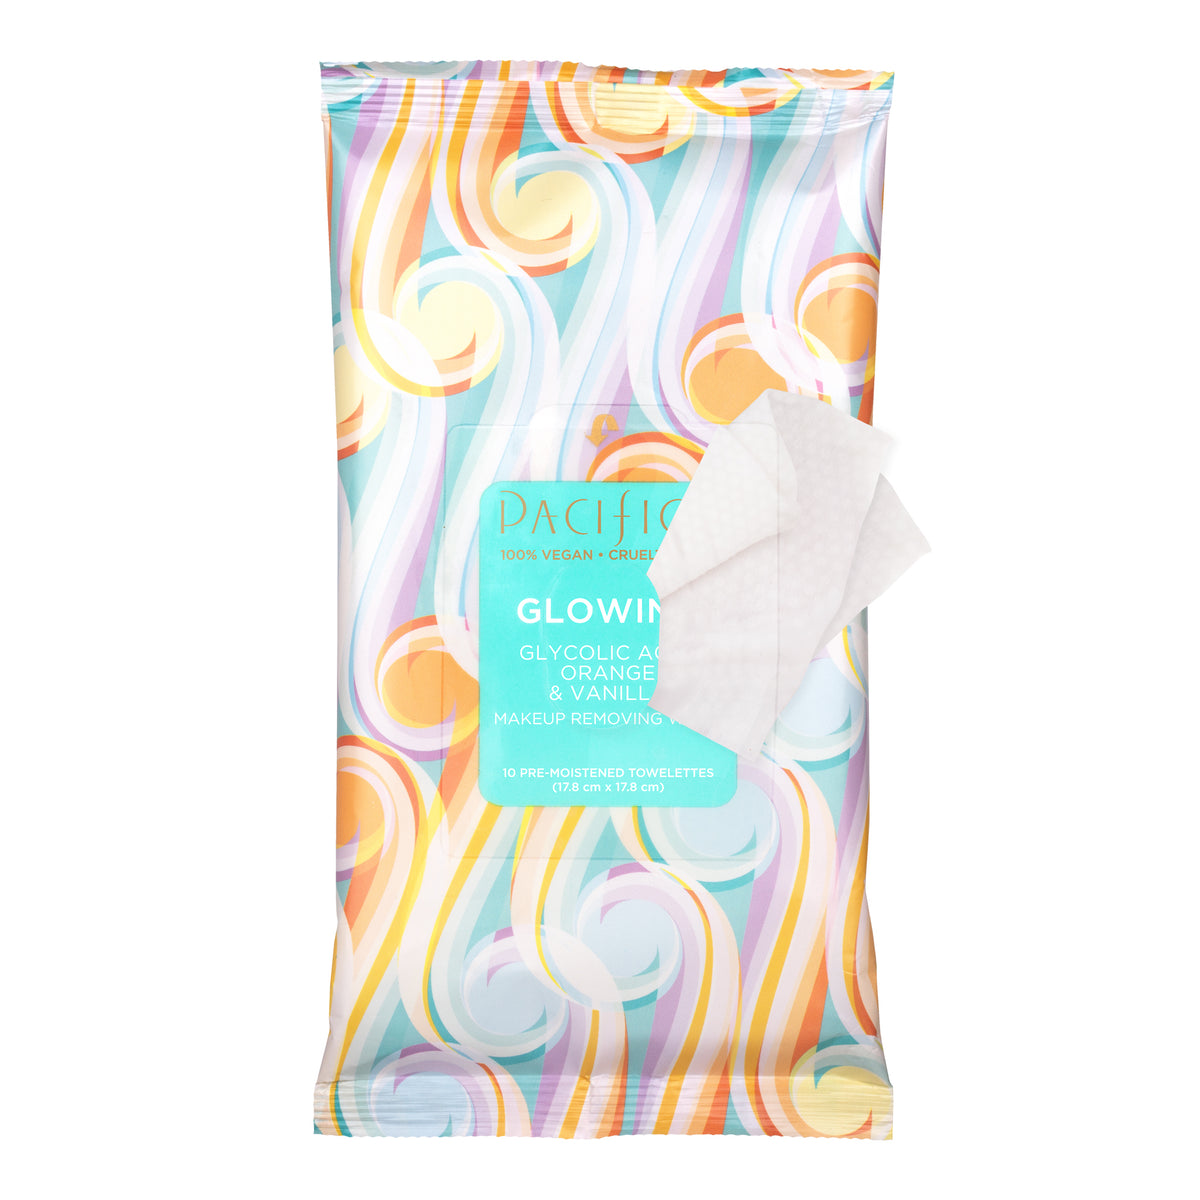 Glowing Glycolic Acid, Orange & Vanilla Makeup Removing Wipes (10ct) - Skin Care - Pacifica Beauty